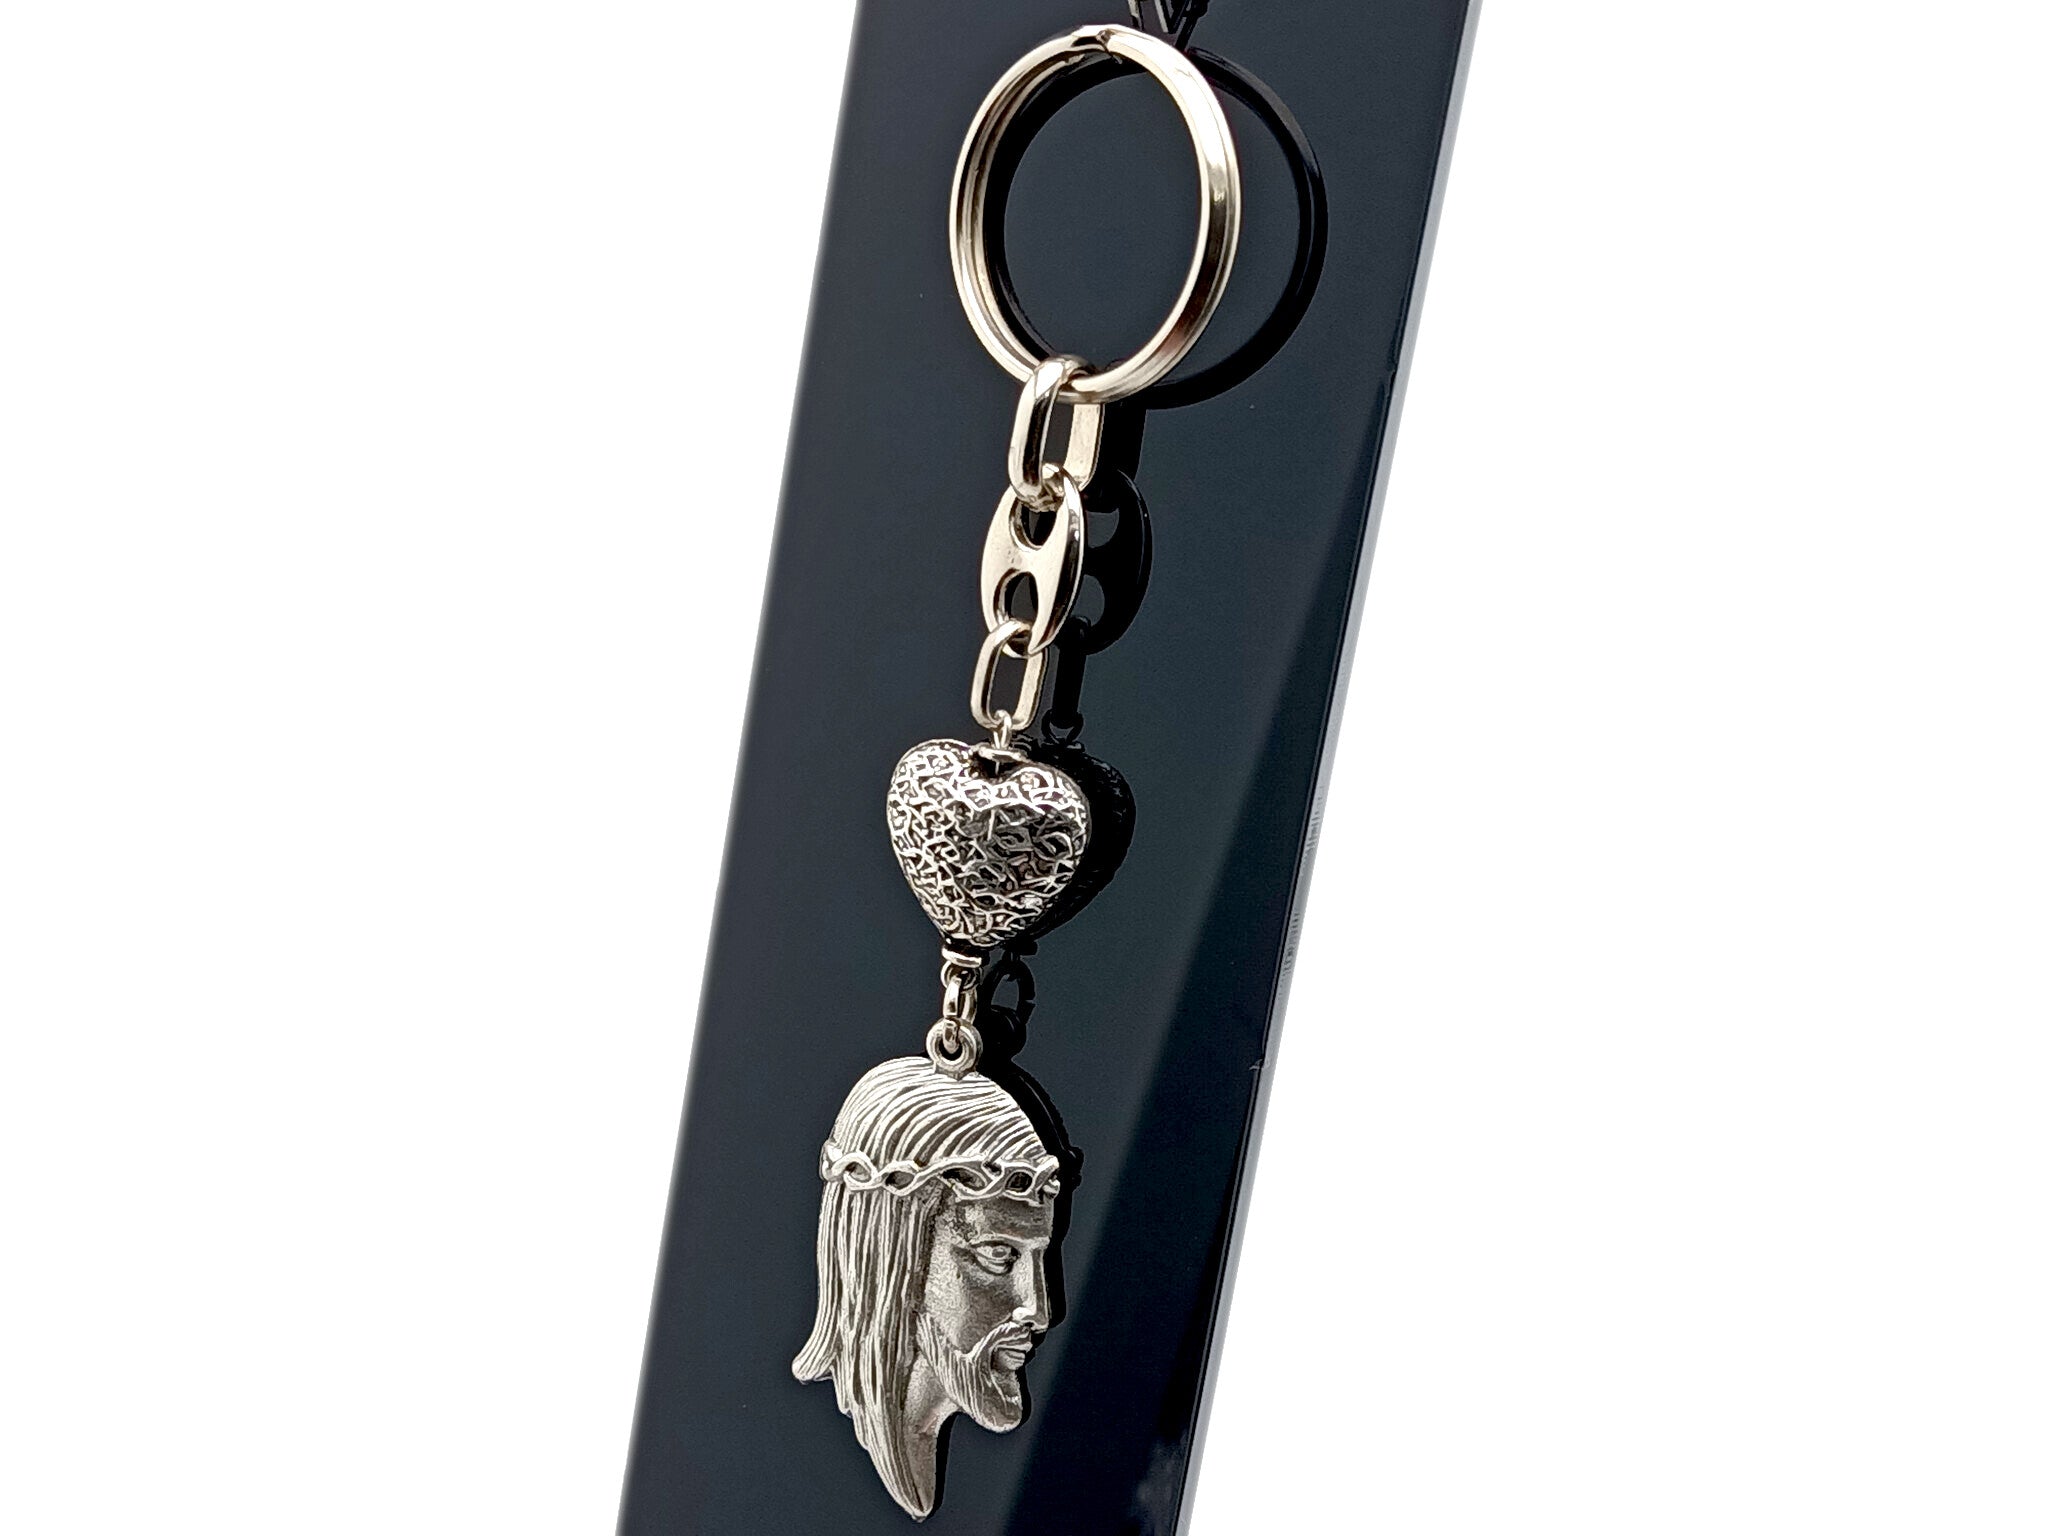 Shop for and Buy Bonanza Clip Economy Snap Clip Key Ring - Nickel Plated at  Keyring.com. Large selection and bulk discounts available.